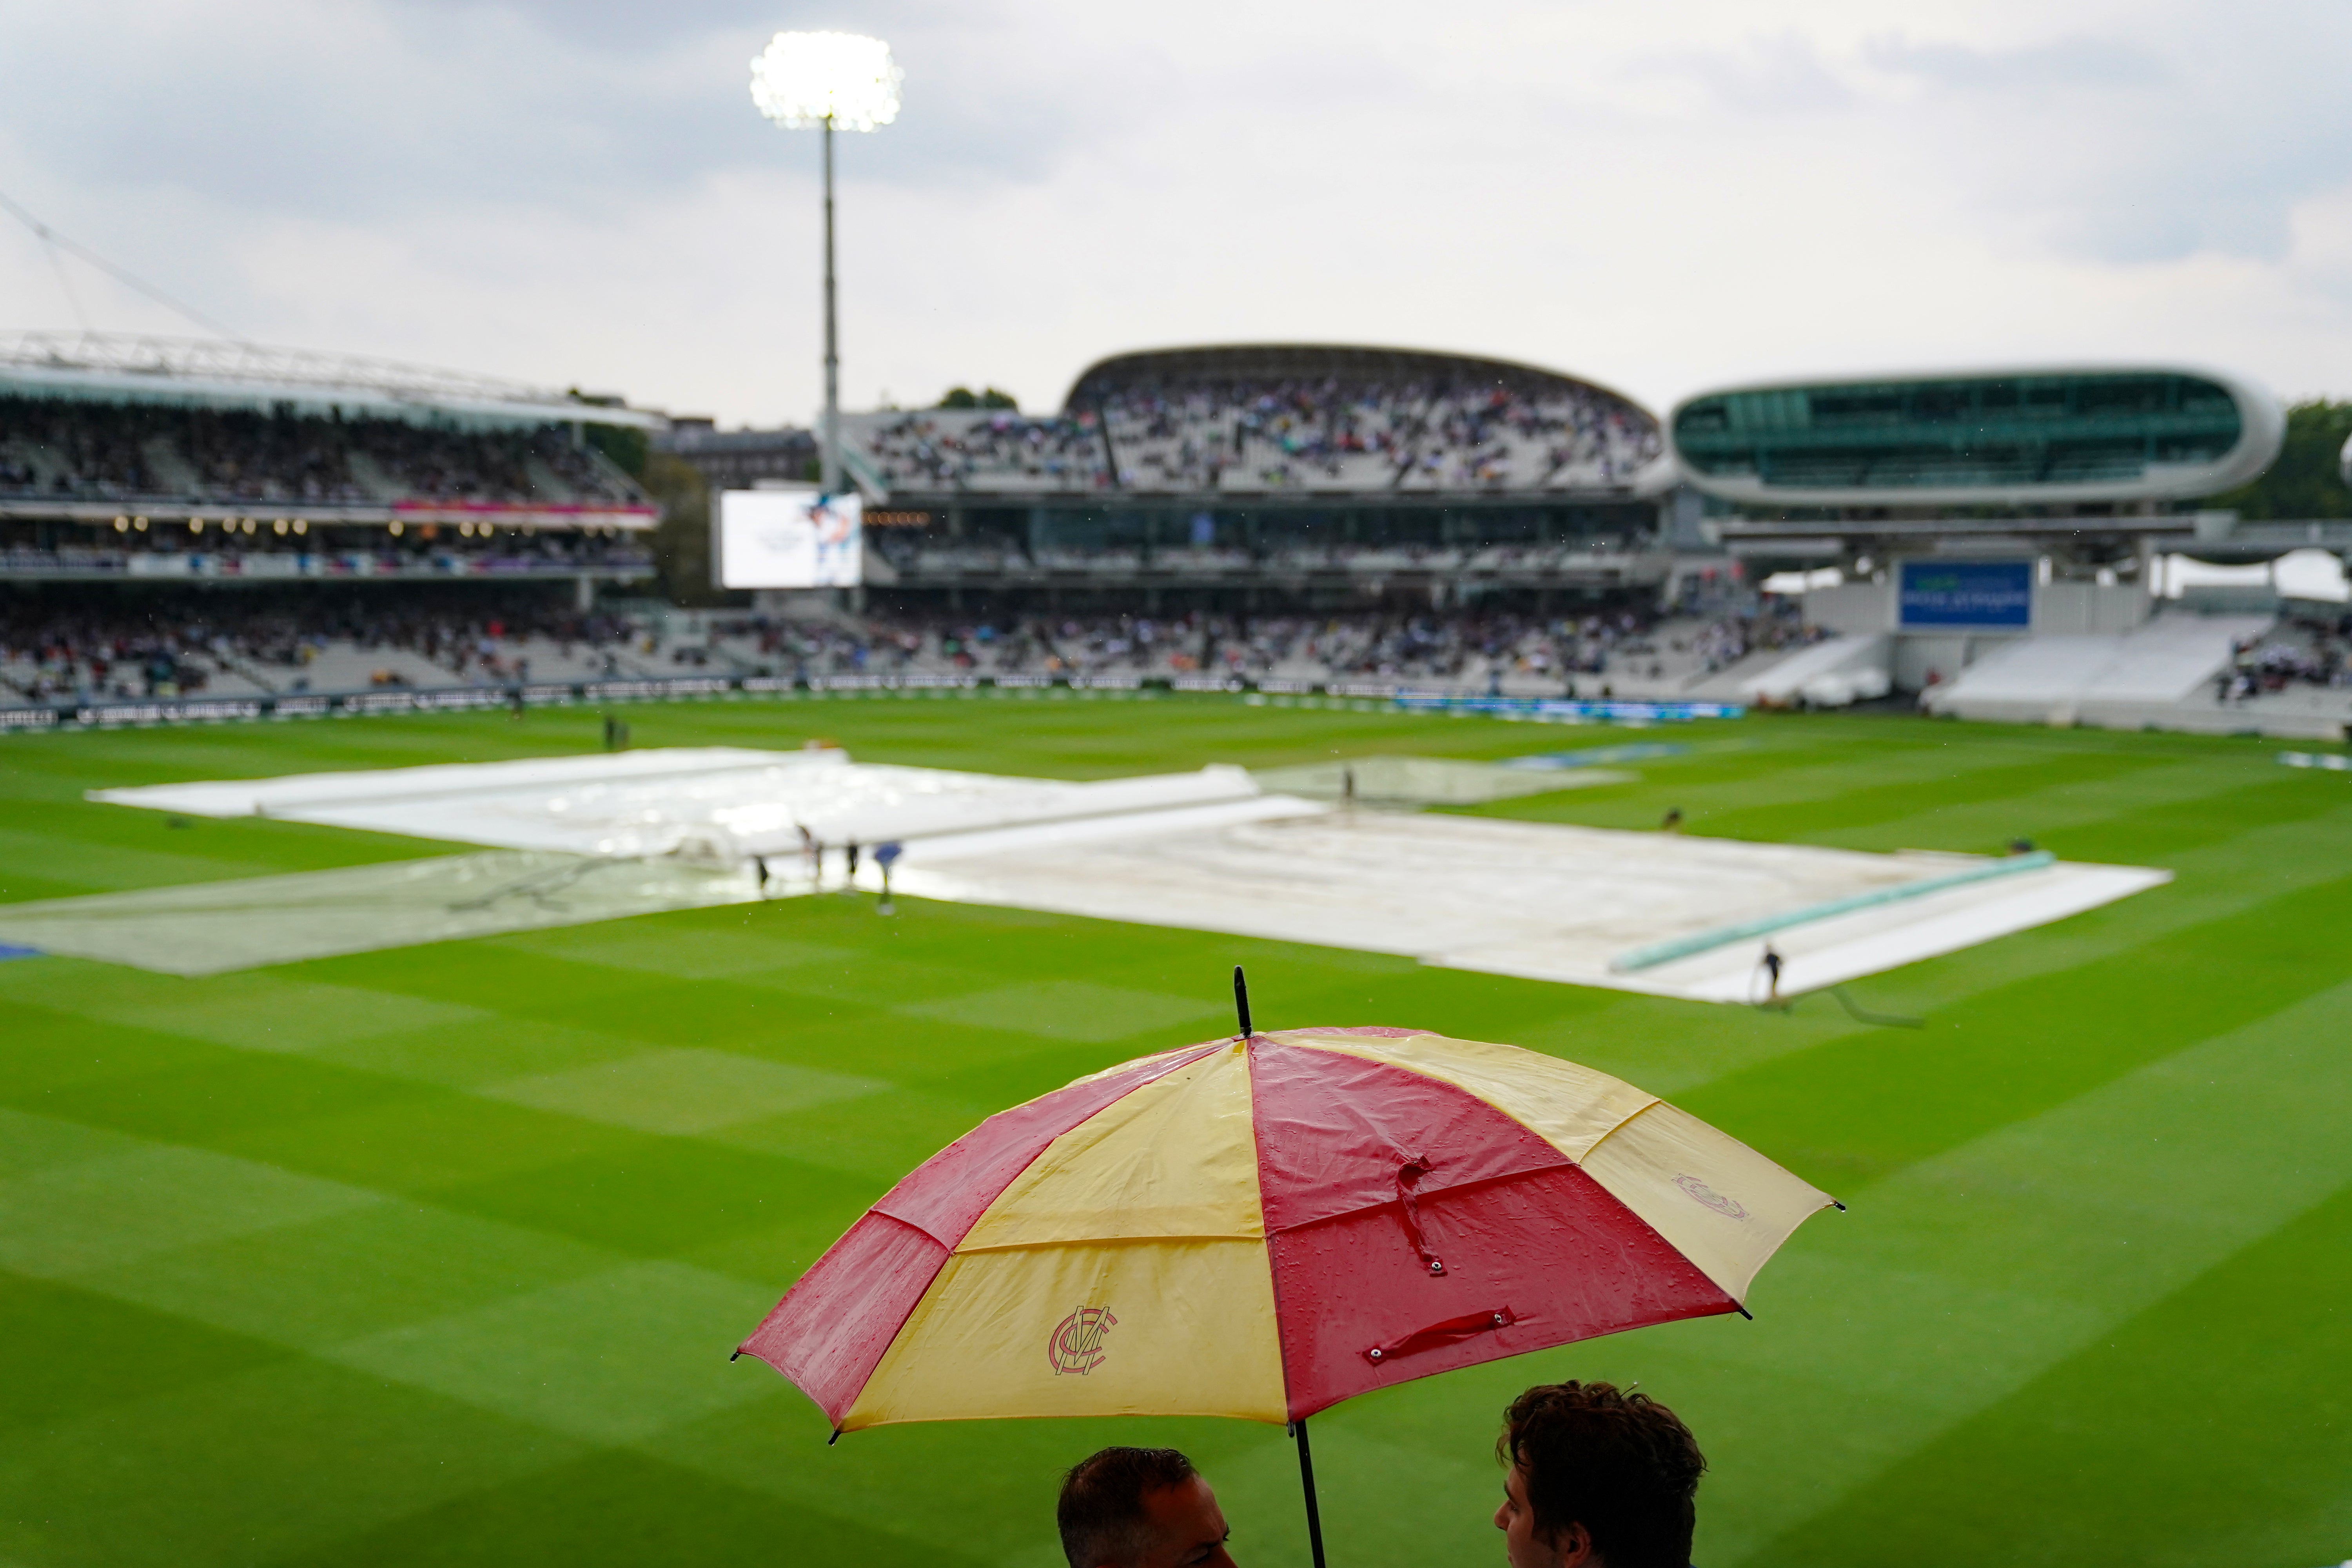 Spectators put up umbrellas as rain stops play during day one at Lord’s (Adam Davy/PA)